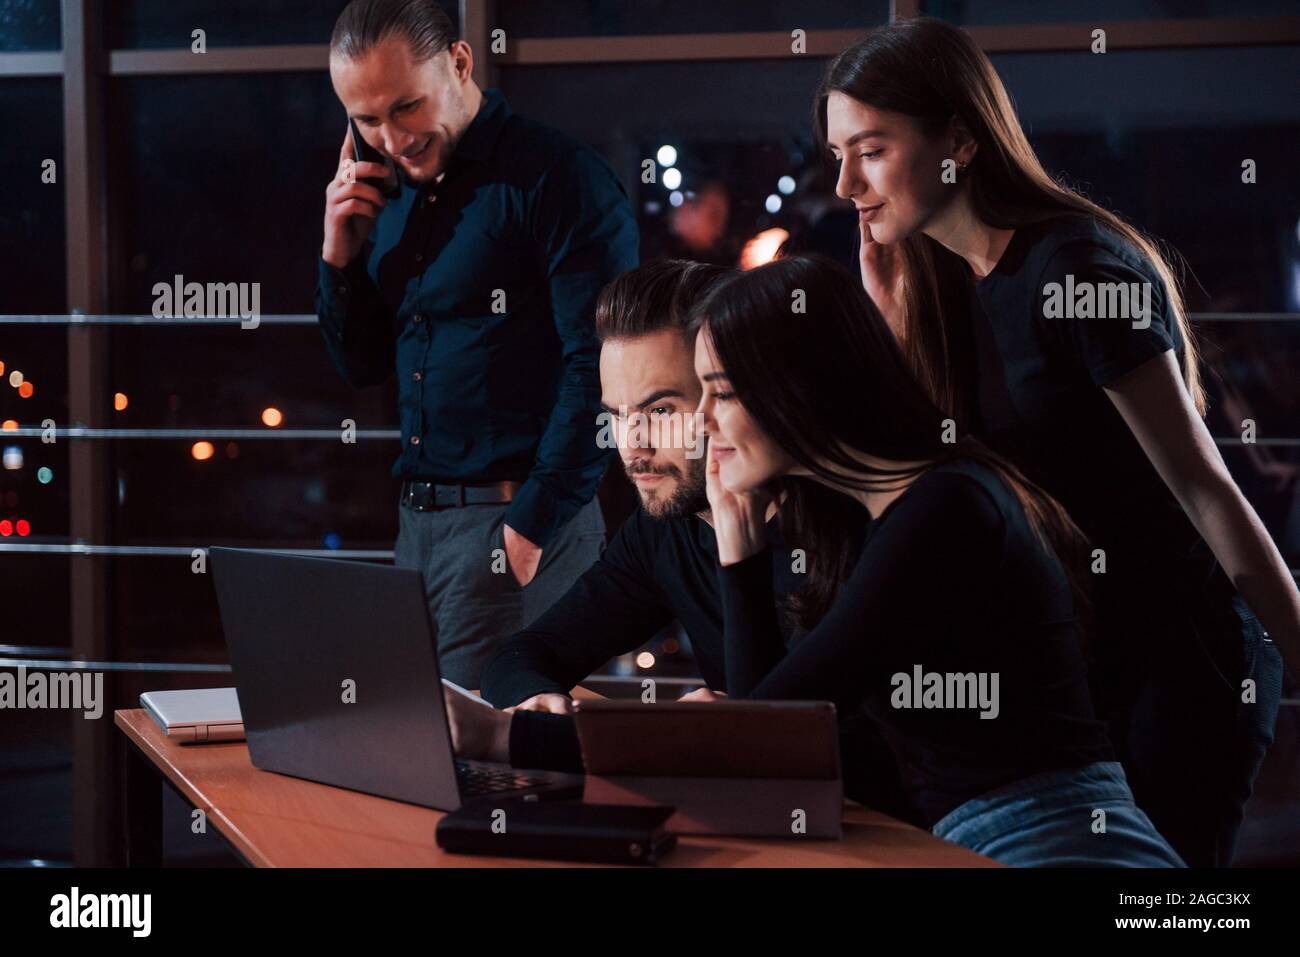 Just a bit and we will be on top. Team of young business people works on their project at night time in the office Stock Photo